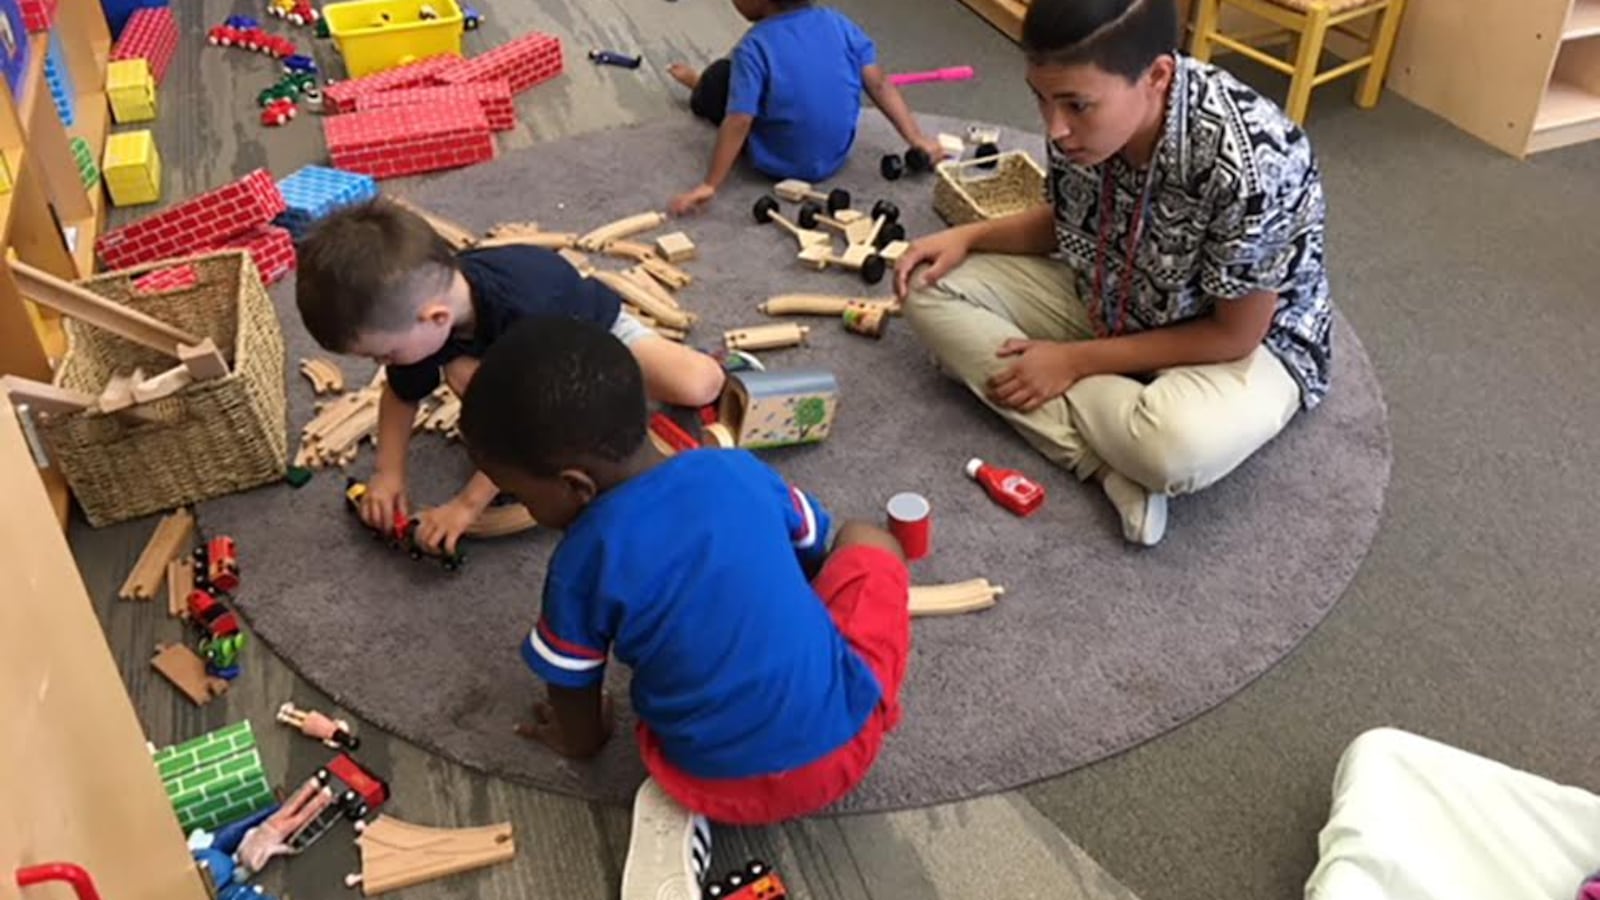 Teach For America corps member Ariel McPherson just began her preschool teaching job with Sewall Child Development Center in one of their satellite locations, the Dahlia Center for Health and Well Being in the North Park Hill neighborhood of Denver.